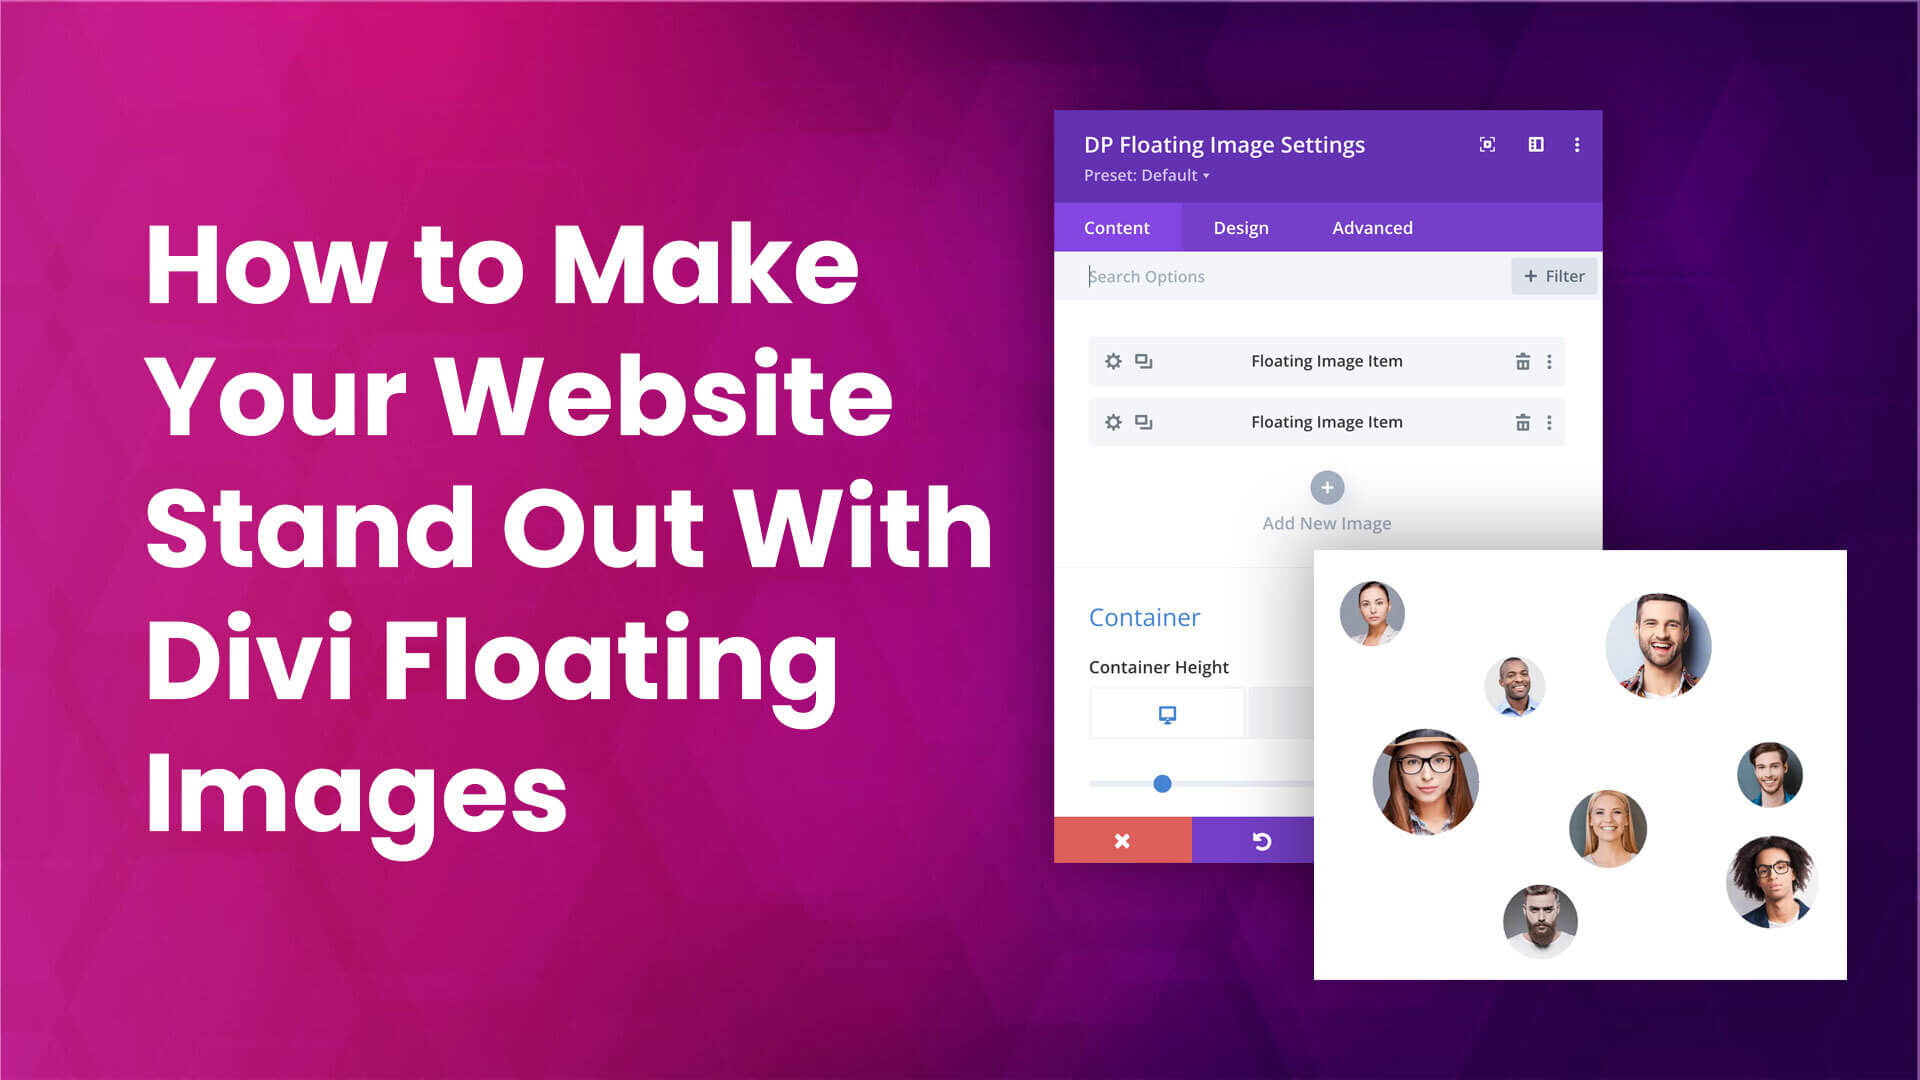 How to Make Your Website Stand Out With Divi Floating Image